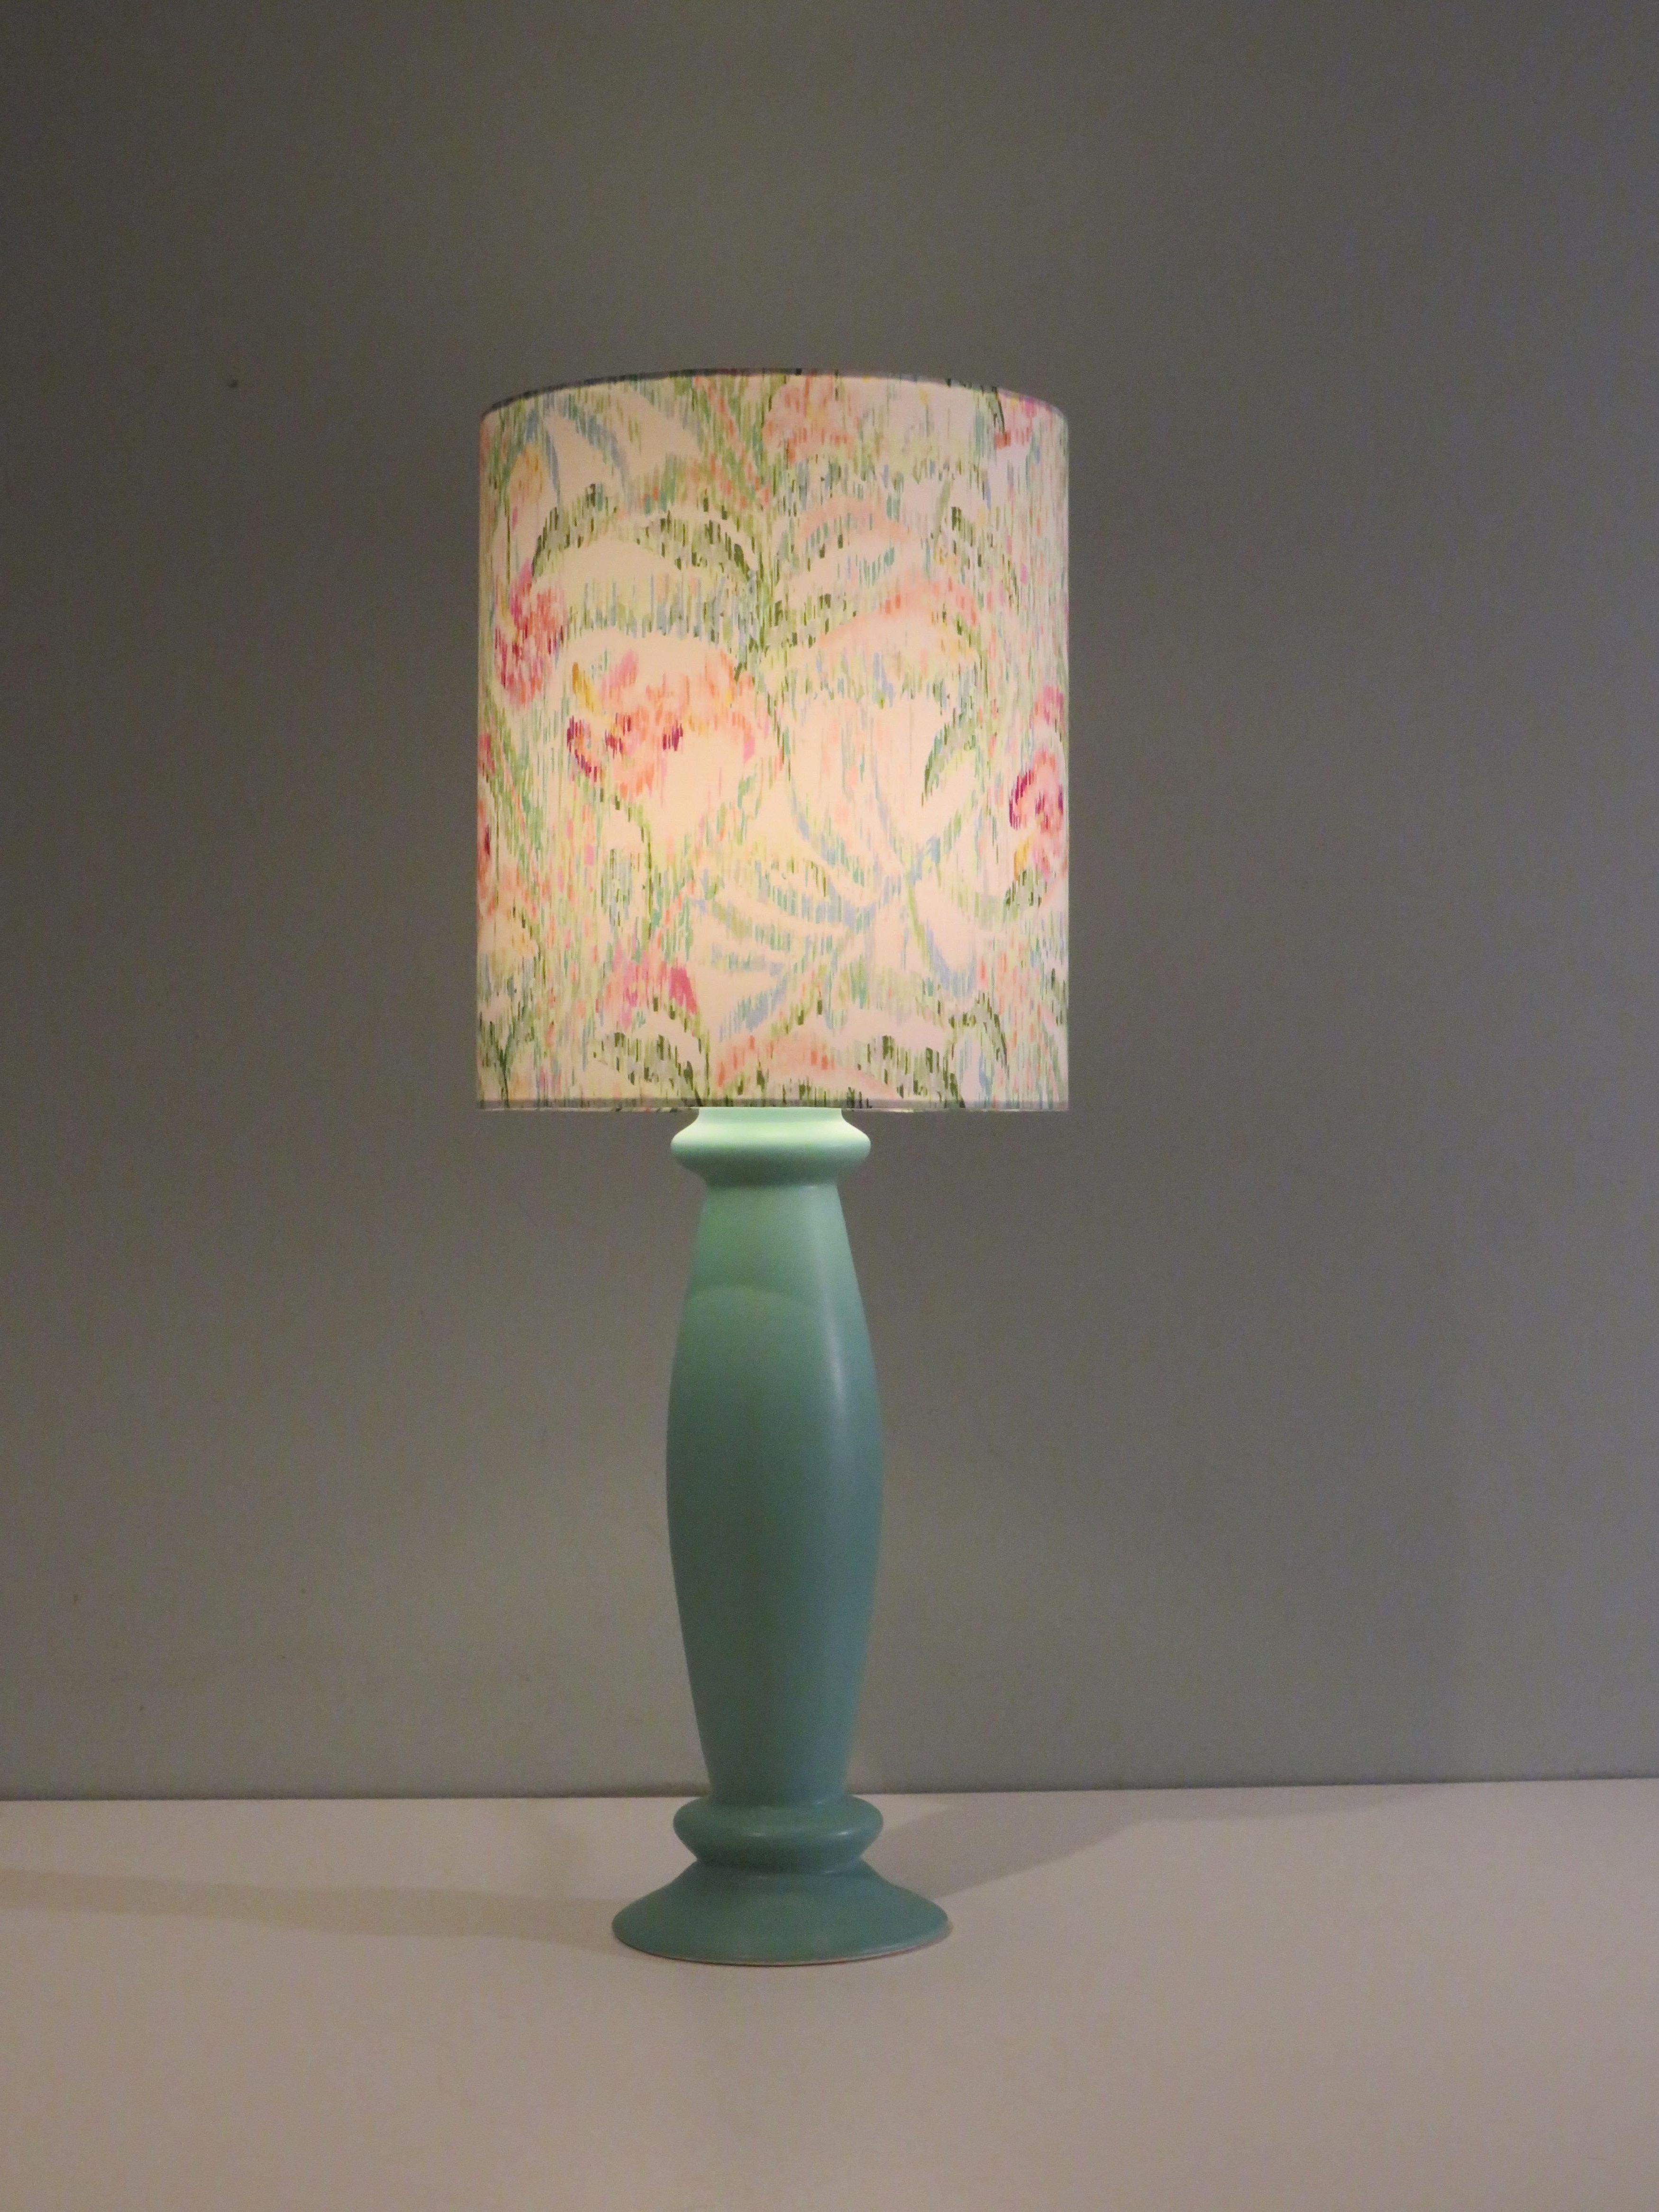 The lamp base has a matte mint green glaze and slim shape.
The table lamp has a professionally handmade custom lampshade made of fine cotton with a floral pattern in soft colors.
The table lamp has a white cord, on and off button and plug. There is